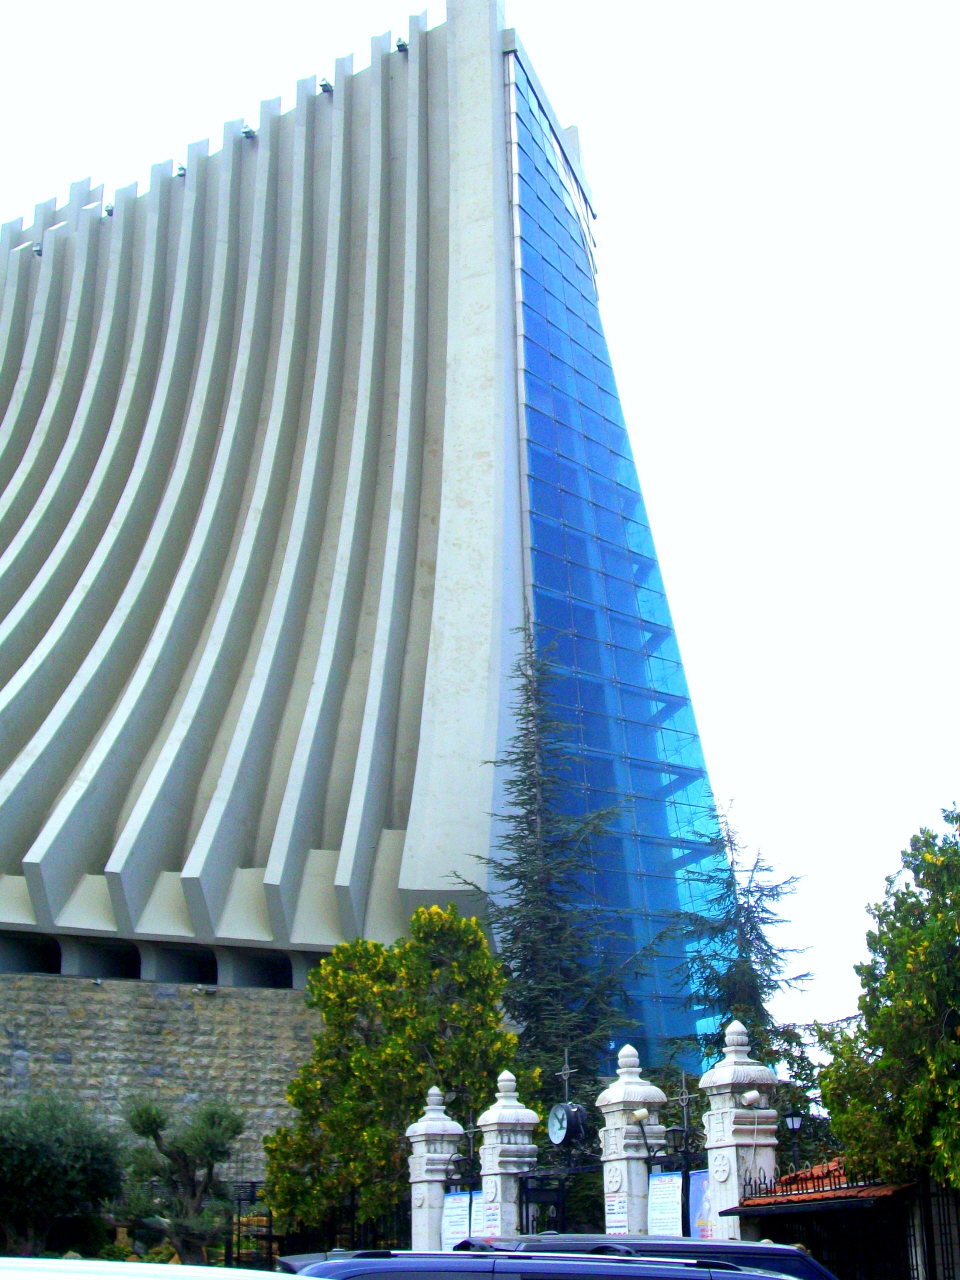 Maronite Cathedral Next to "Our Lady of Lebanon" Statue - Harissa, Lebanon